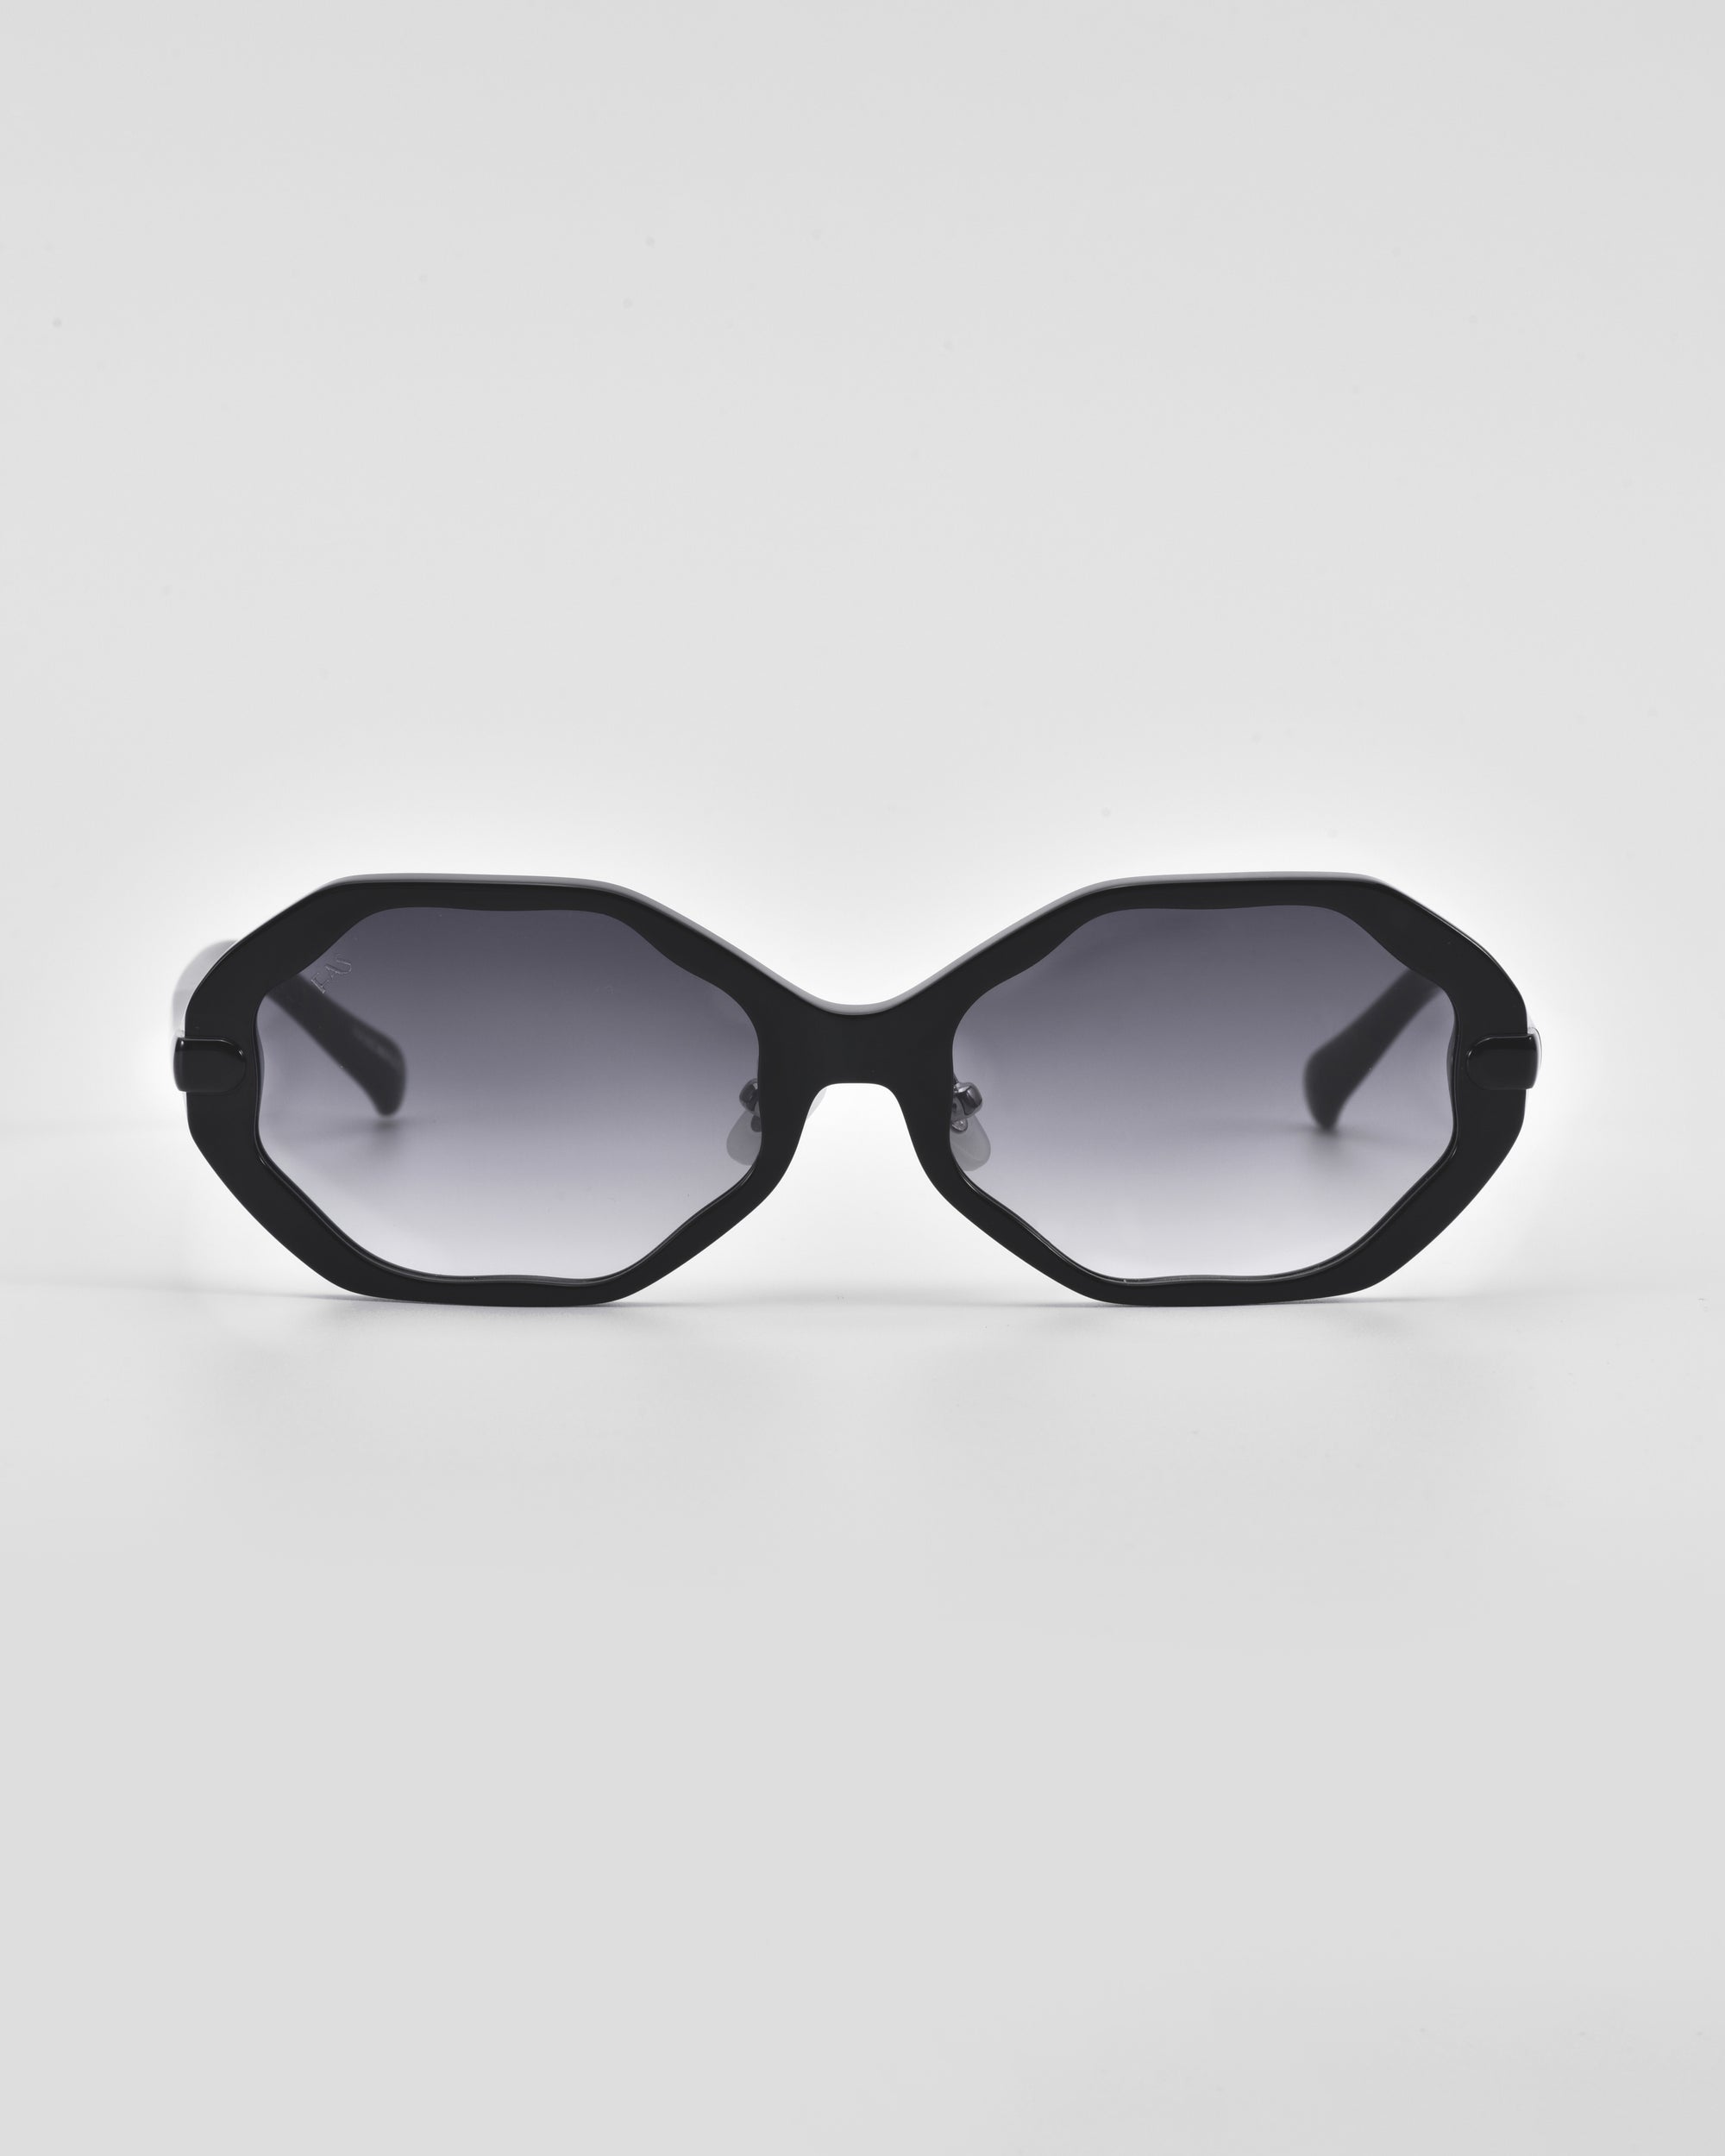 A pair of black octagonal Lotus sunglasses by For Art&#39;s Sake® with gray-tinted lenses set against a white background. The design is minimalist, featuring thin temples and no visible branding or adornments. Jade-stone nose pads and the clean, angular silhouette give these sunglasses a modern and stylish appearance.